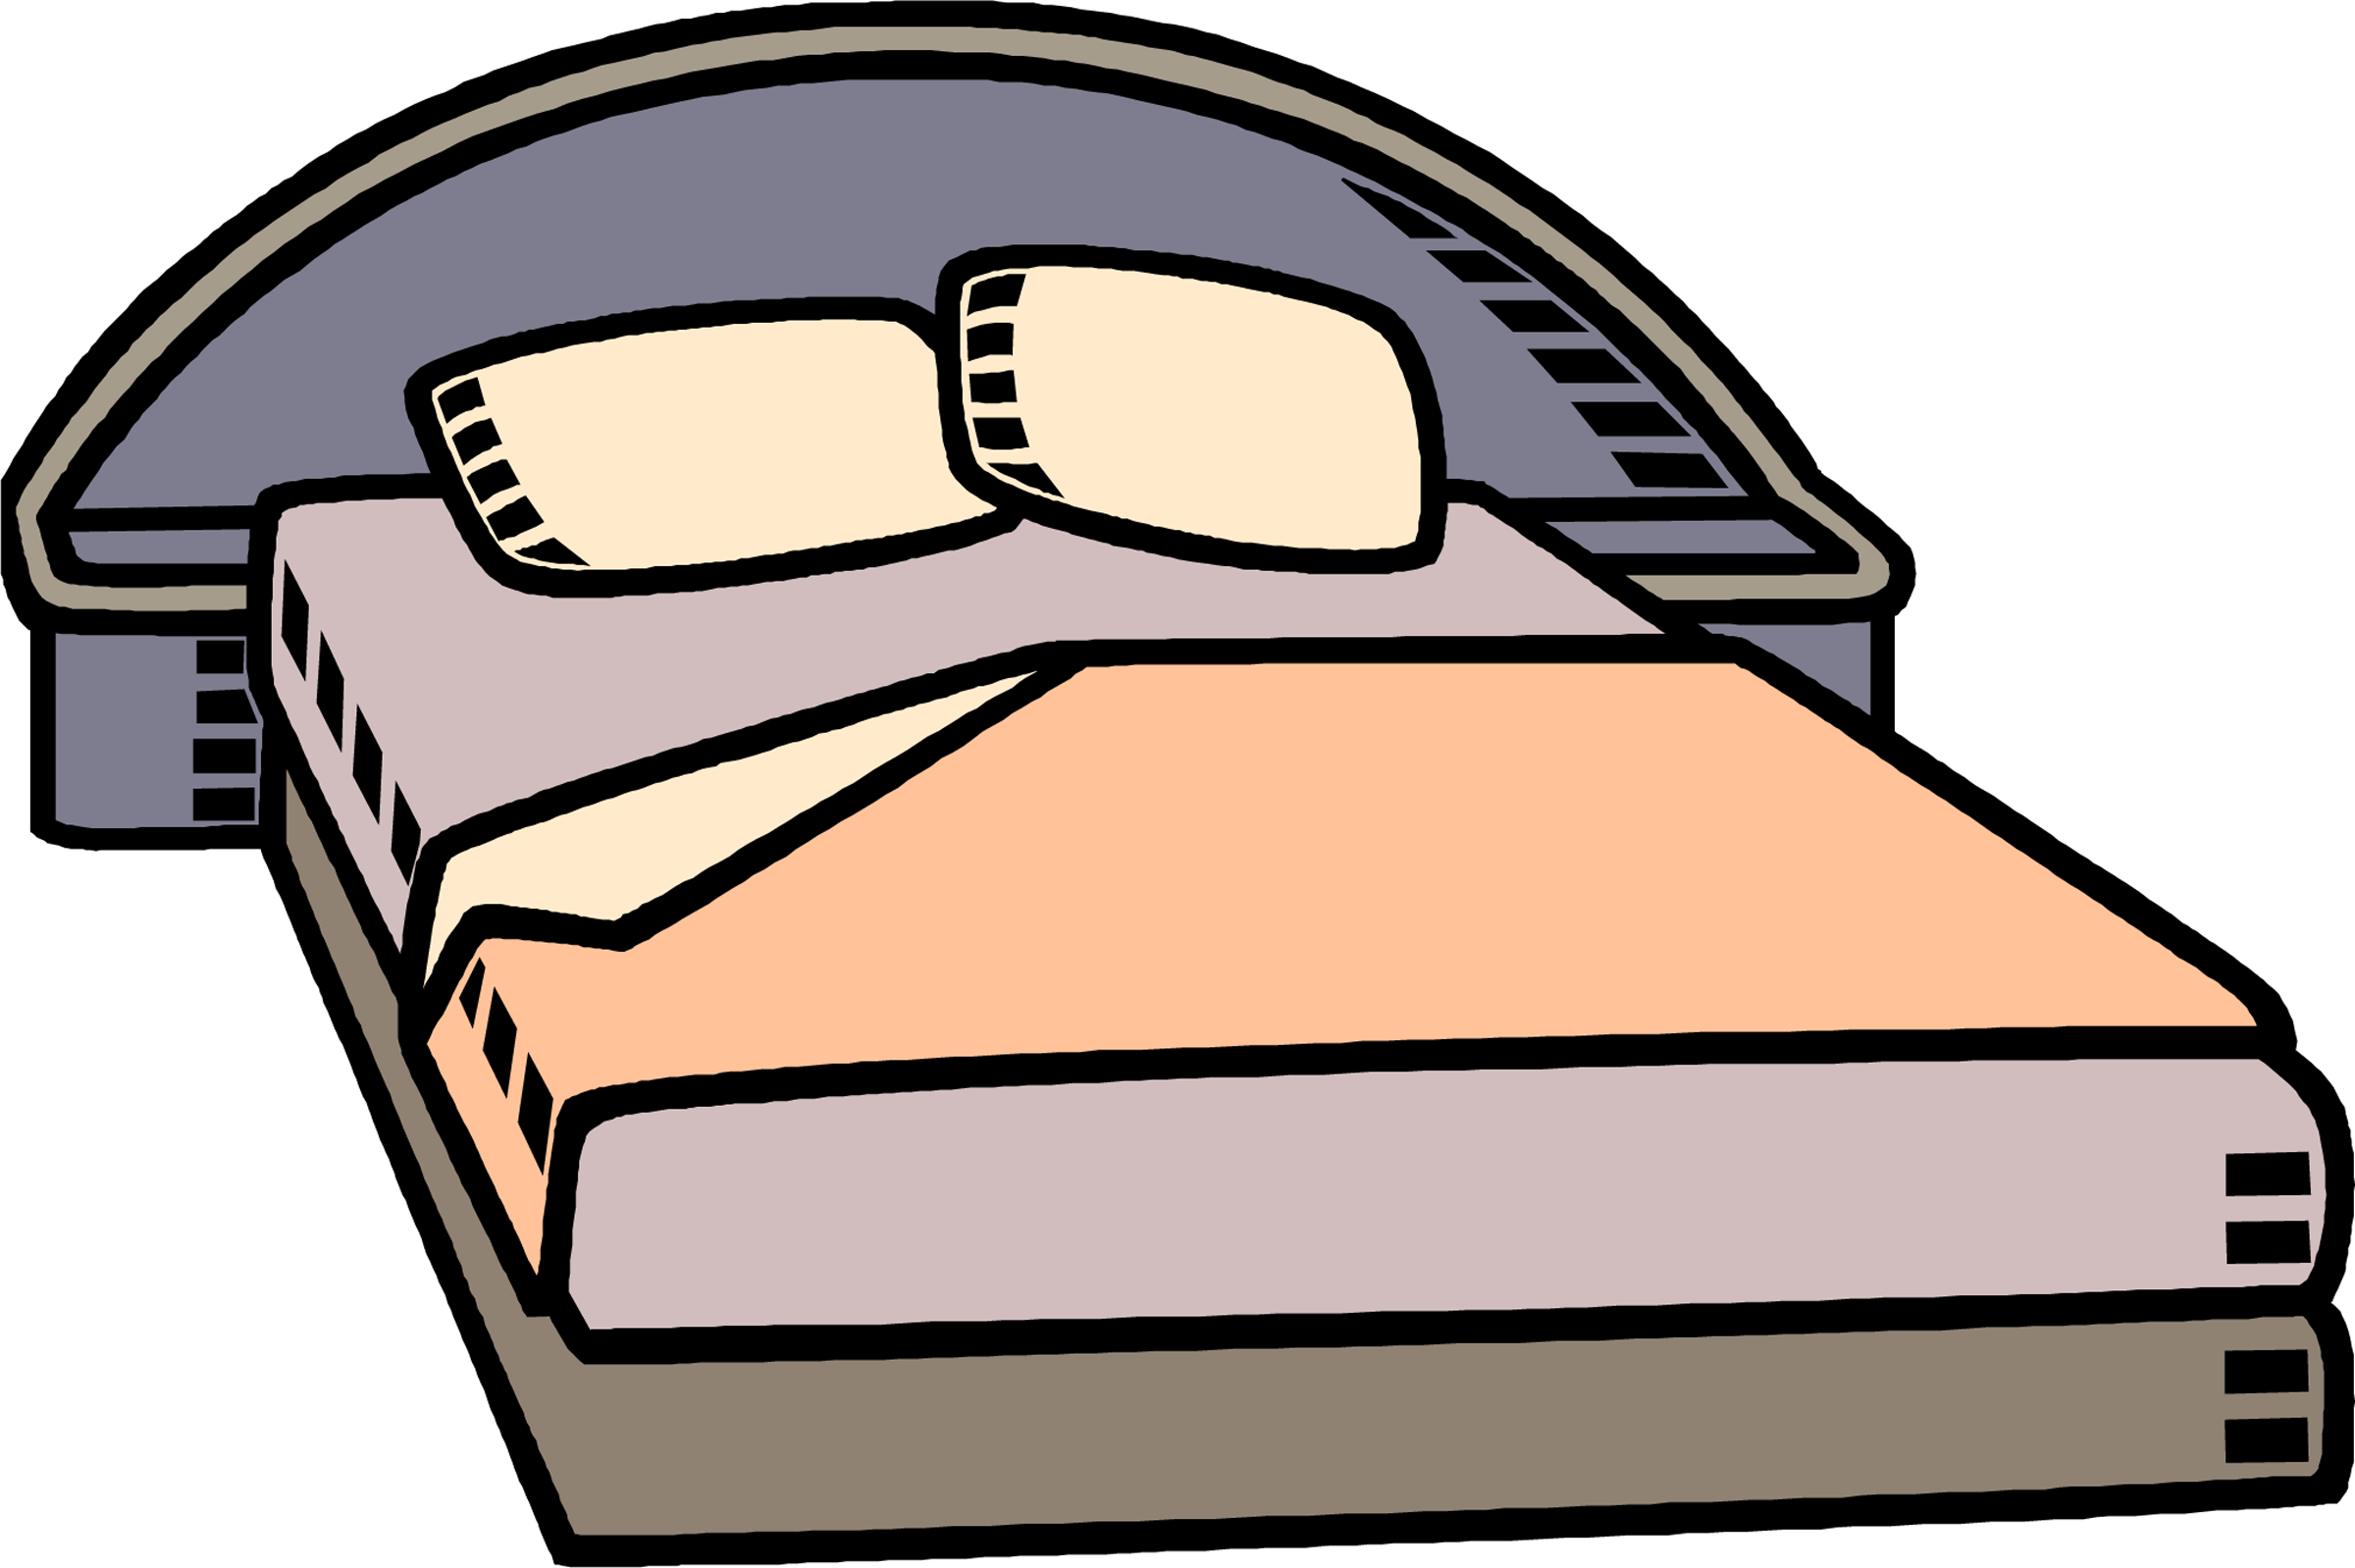 Make Bed Animated Picture - ClipArt Best